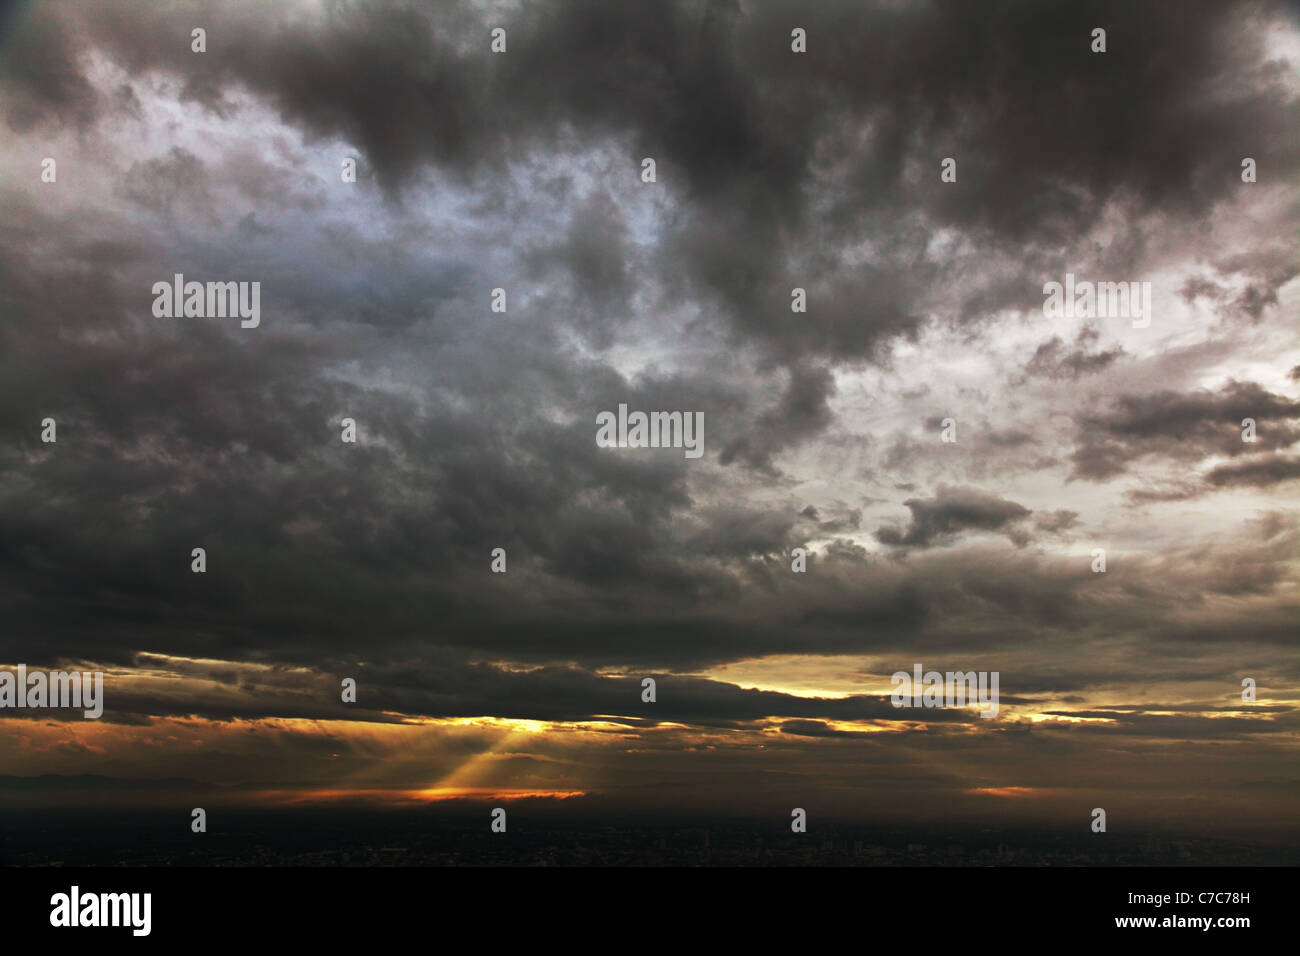 Dramatic sky of heavy gray clouds and sunbeams Stock Photo